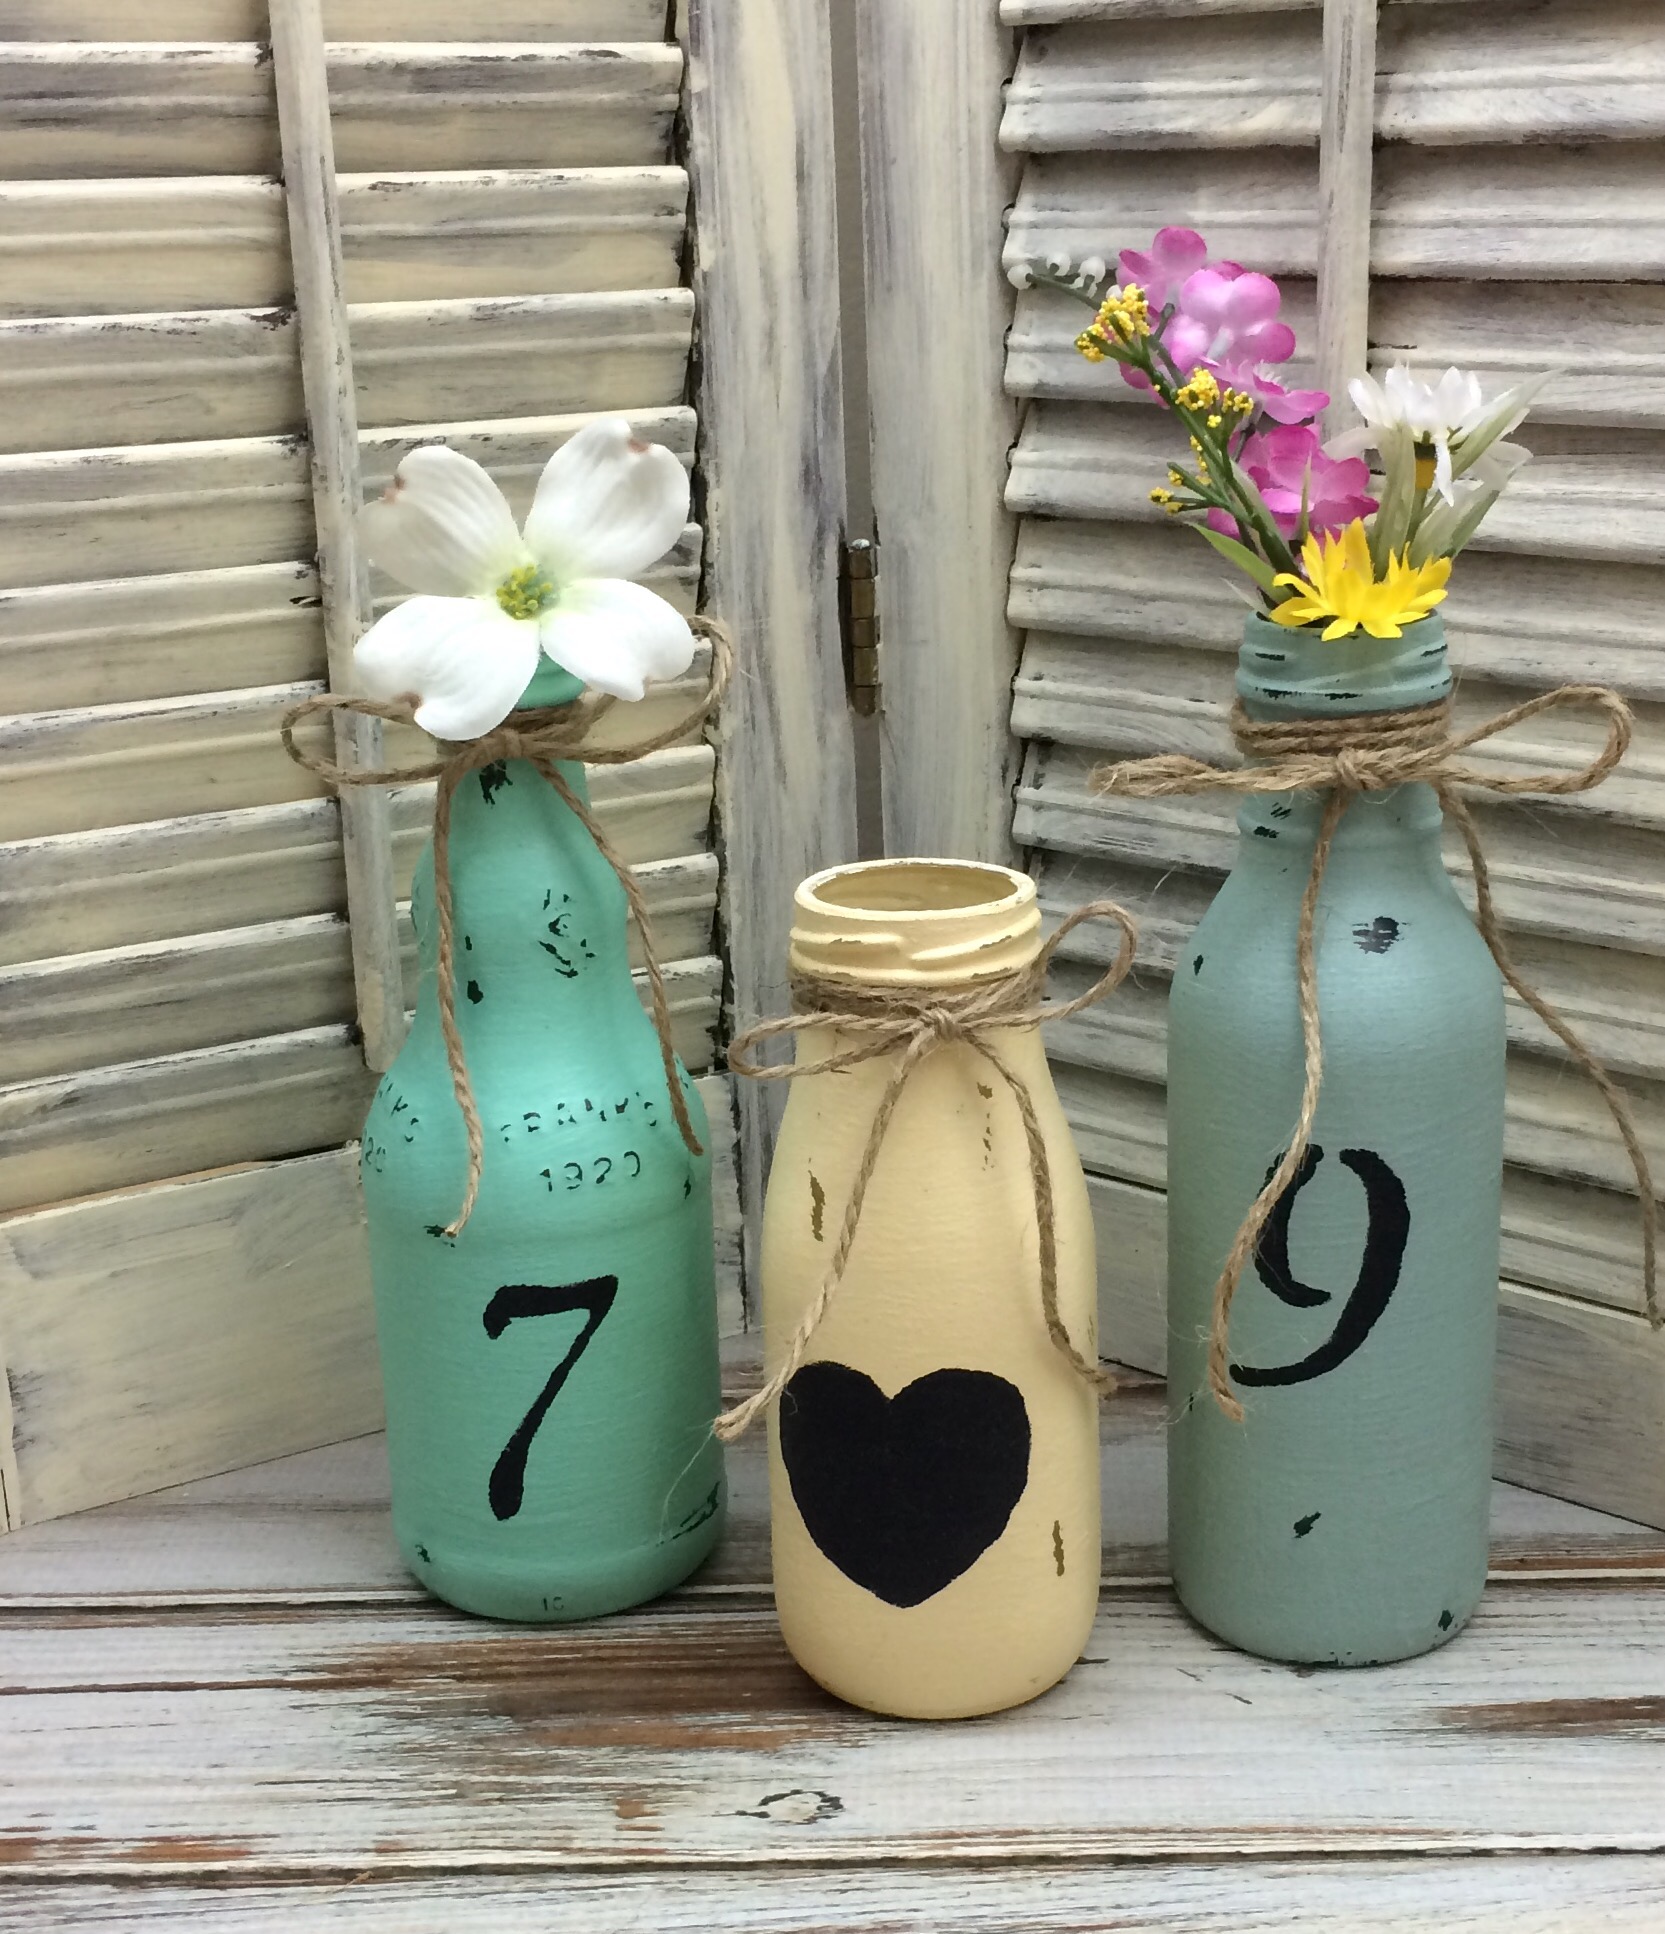 How to make homemade chalk paint from one household ingredient